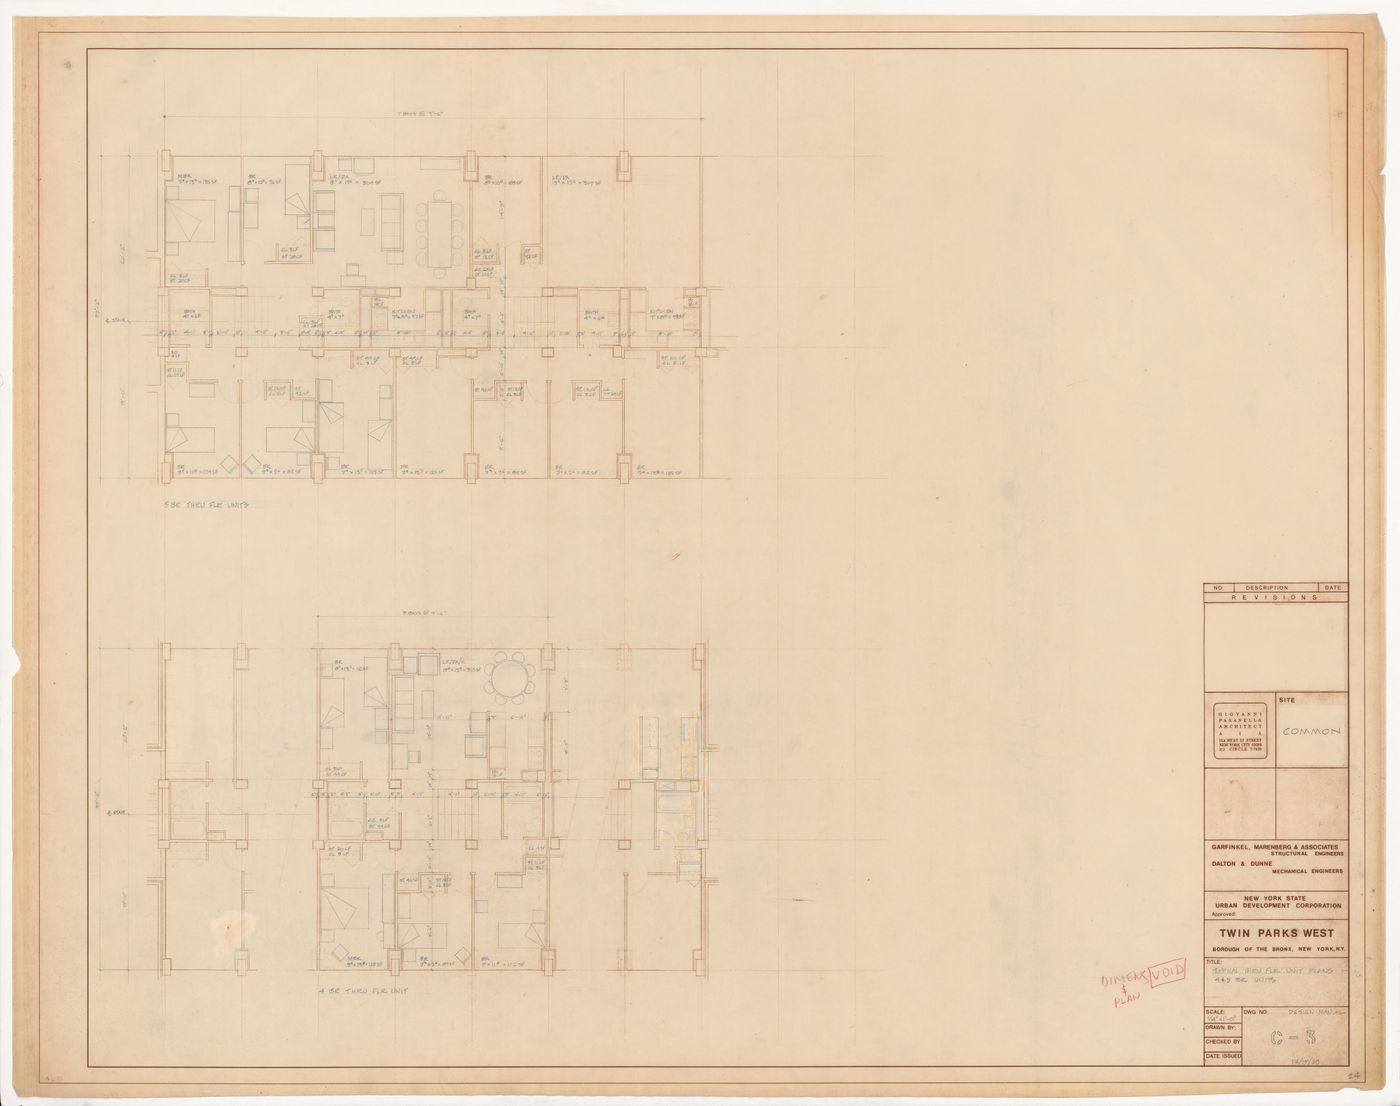 Typical thru floor unit plans for Twin Parks West, Sites R5-7, 10-12, 6, Bronx, New York